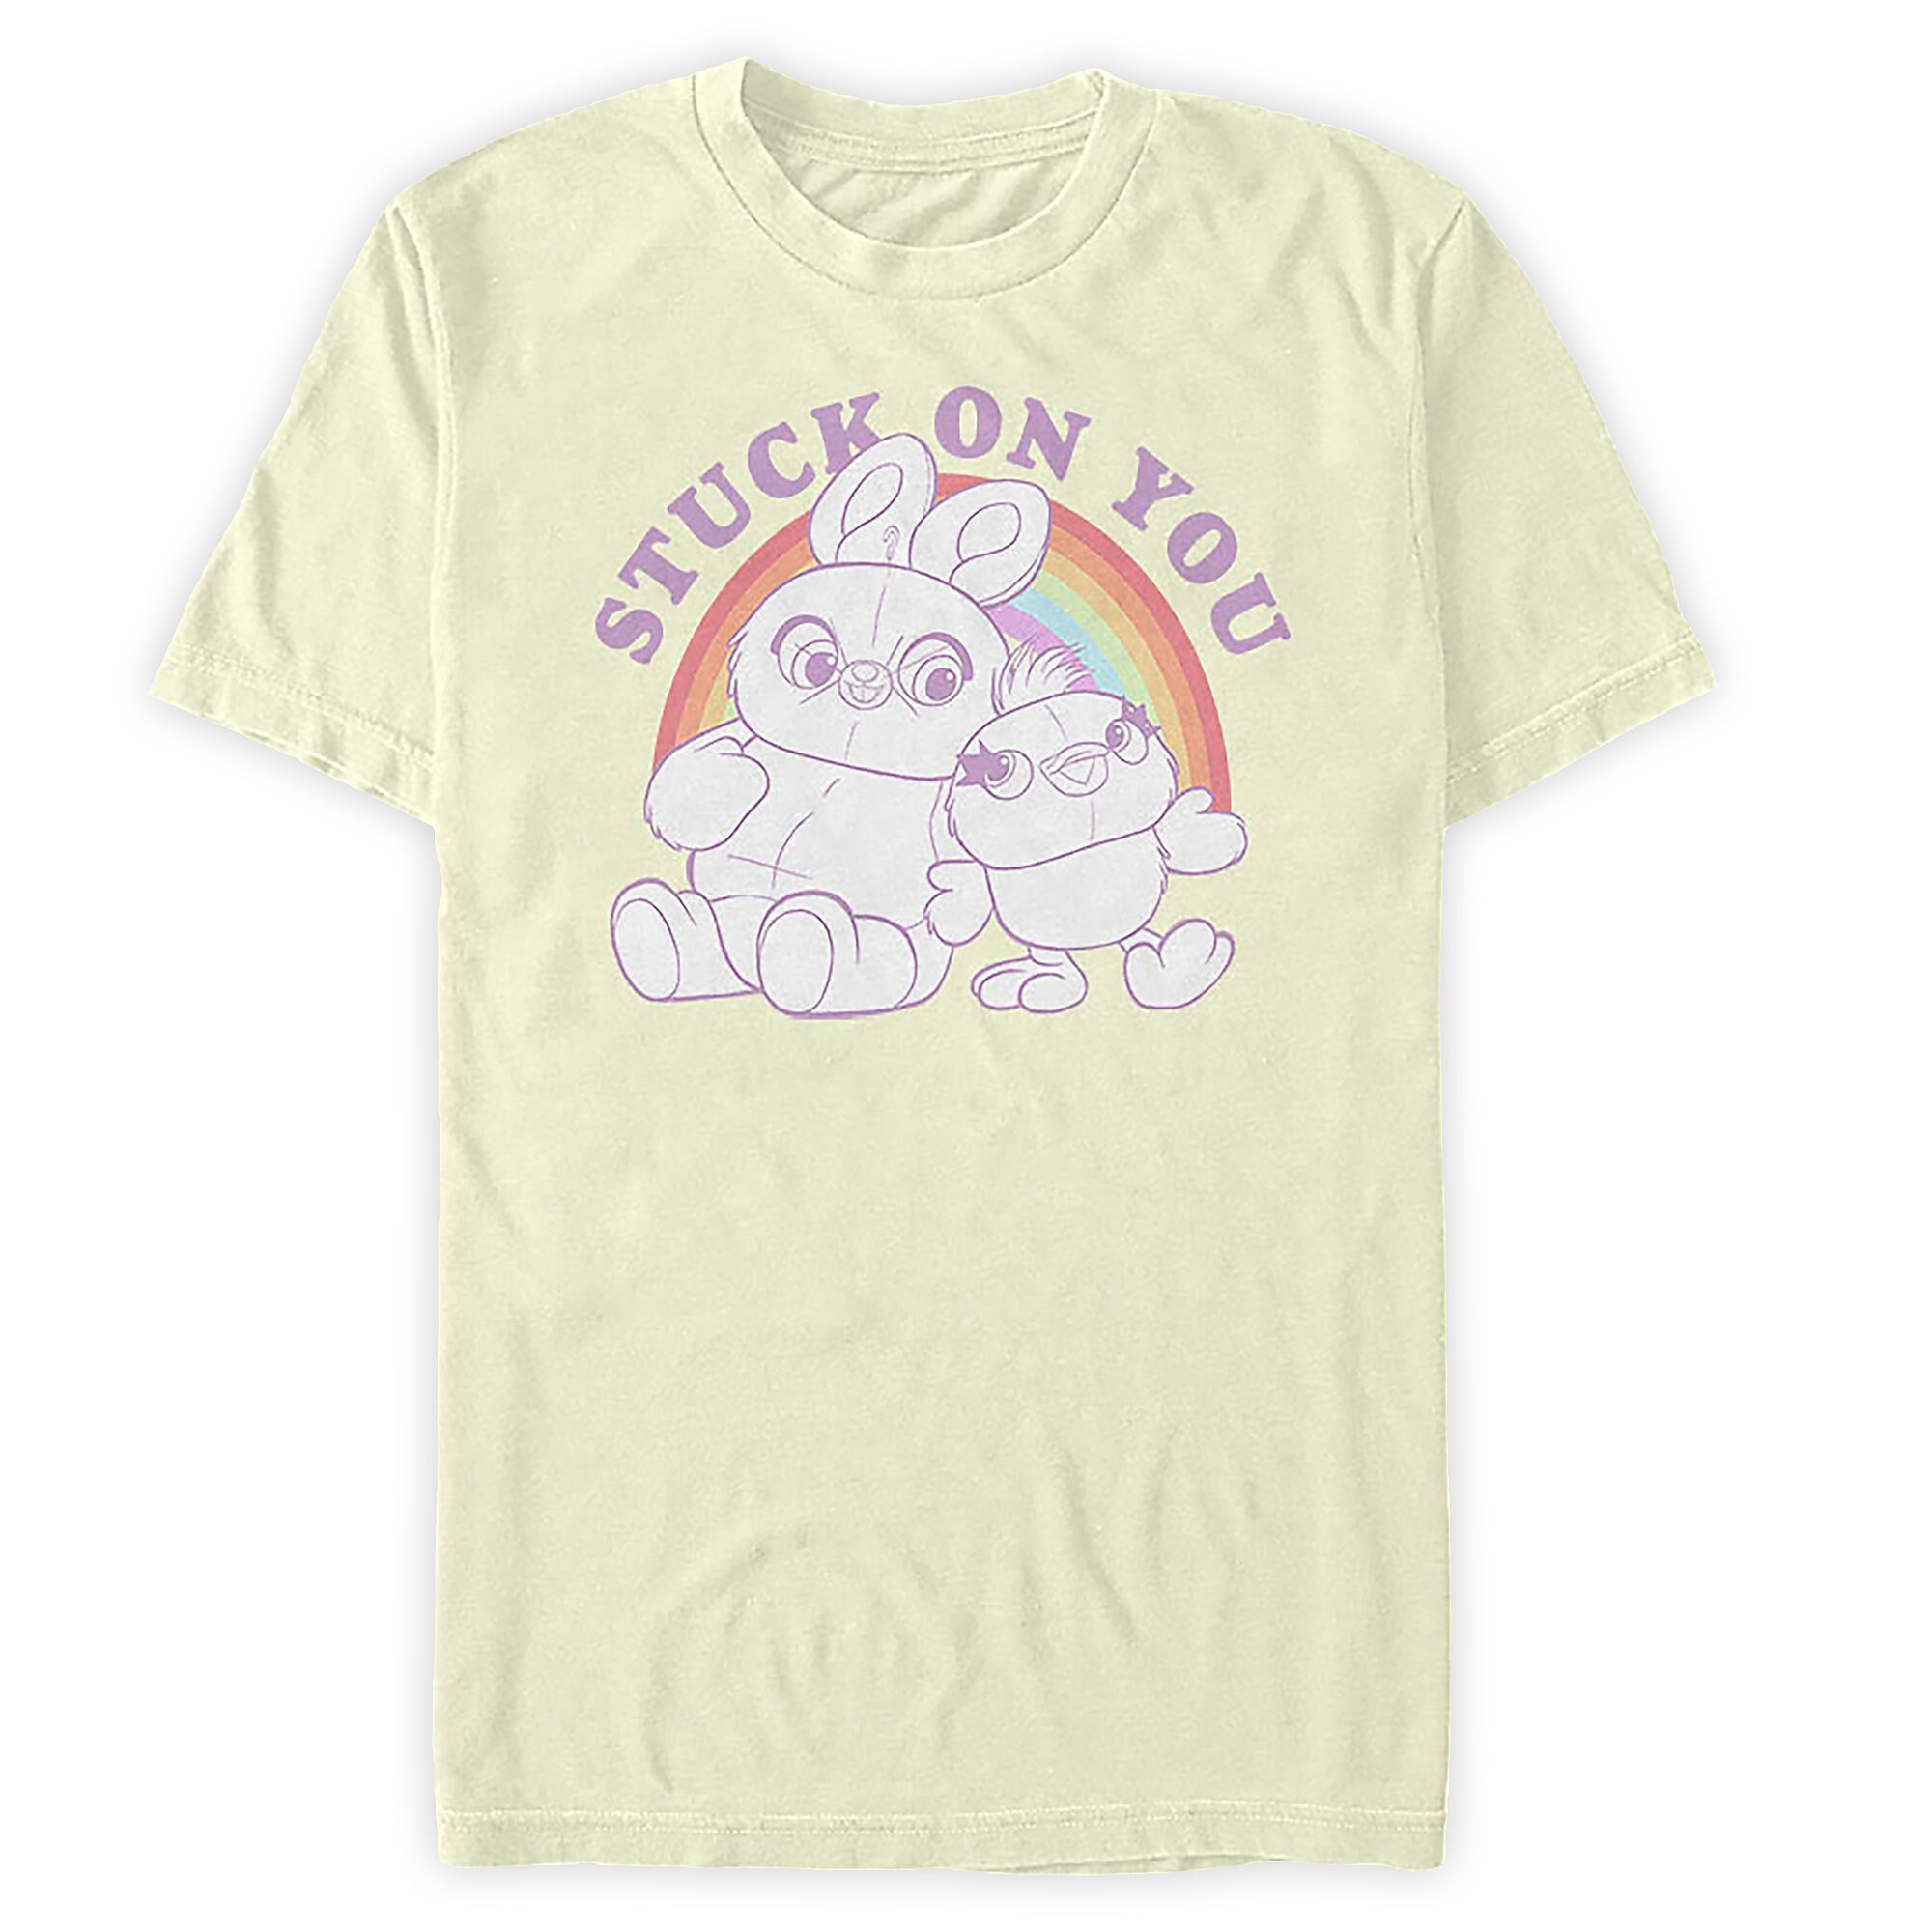 Ducky and Bunny ''Stuck on You'' T-Shirt for Adults - Toy Story 4